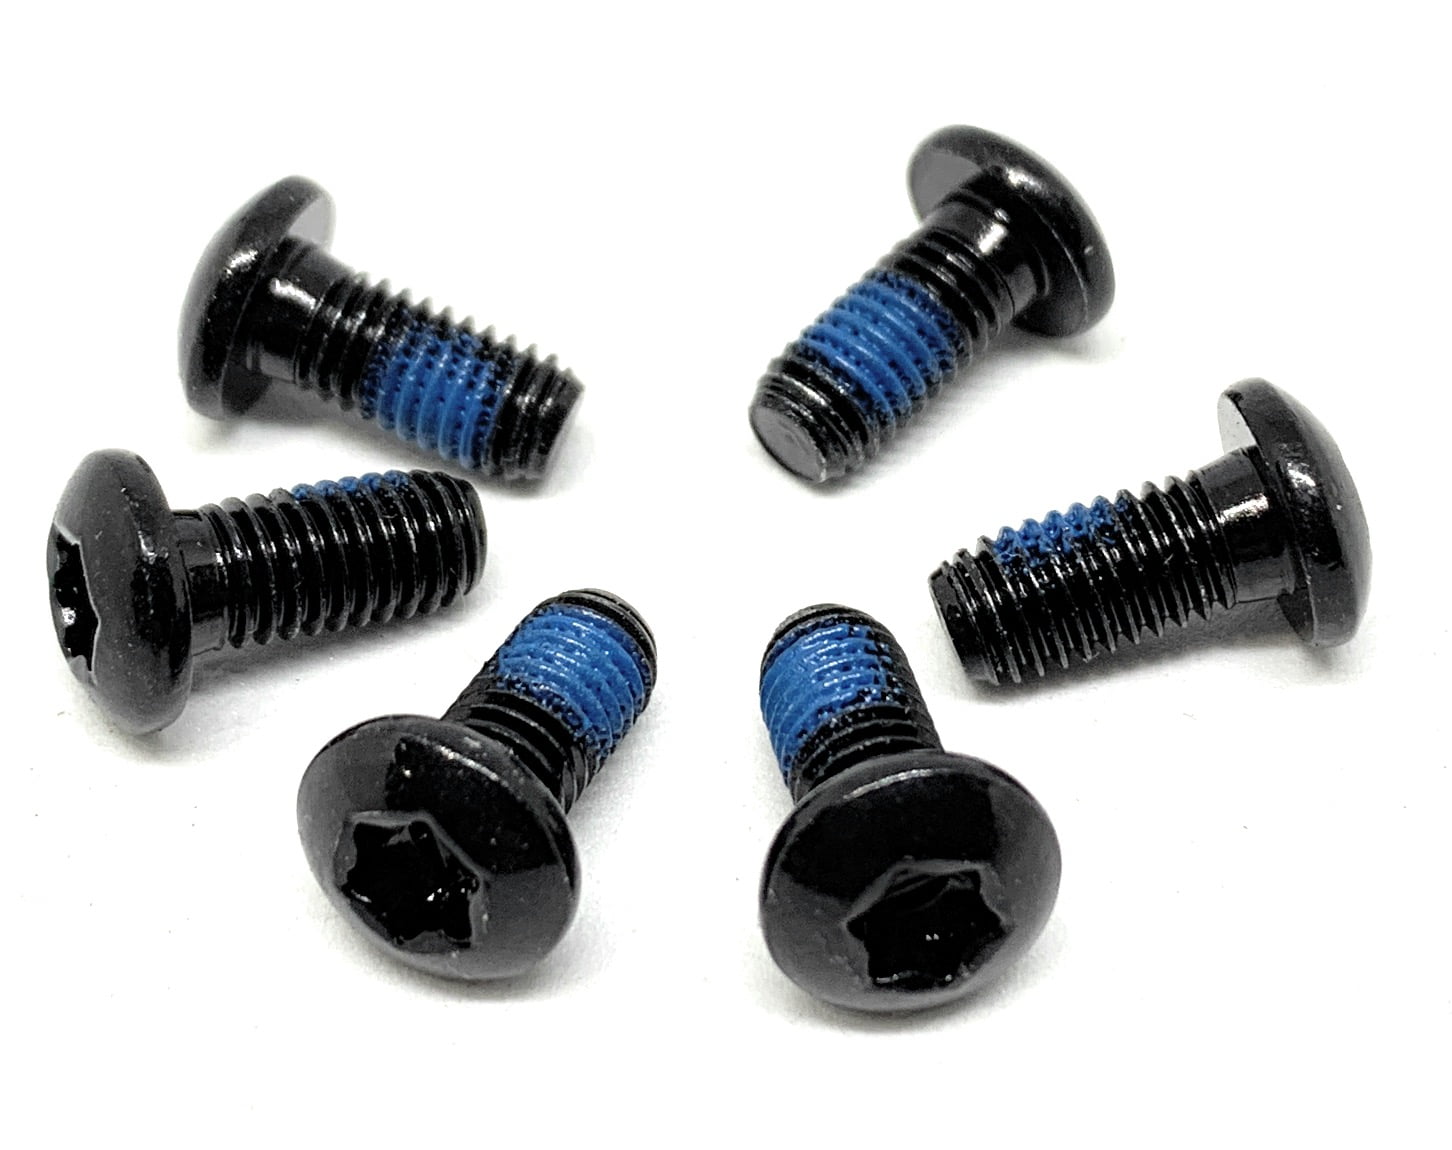 All Bicycle T Alloy Bolts Black M5 x 10mm pack of 6pcs - 2005black